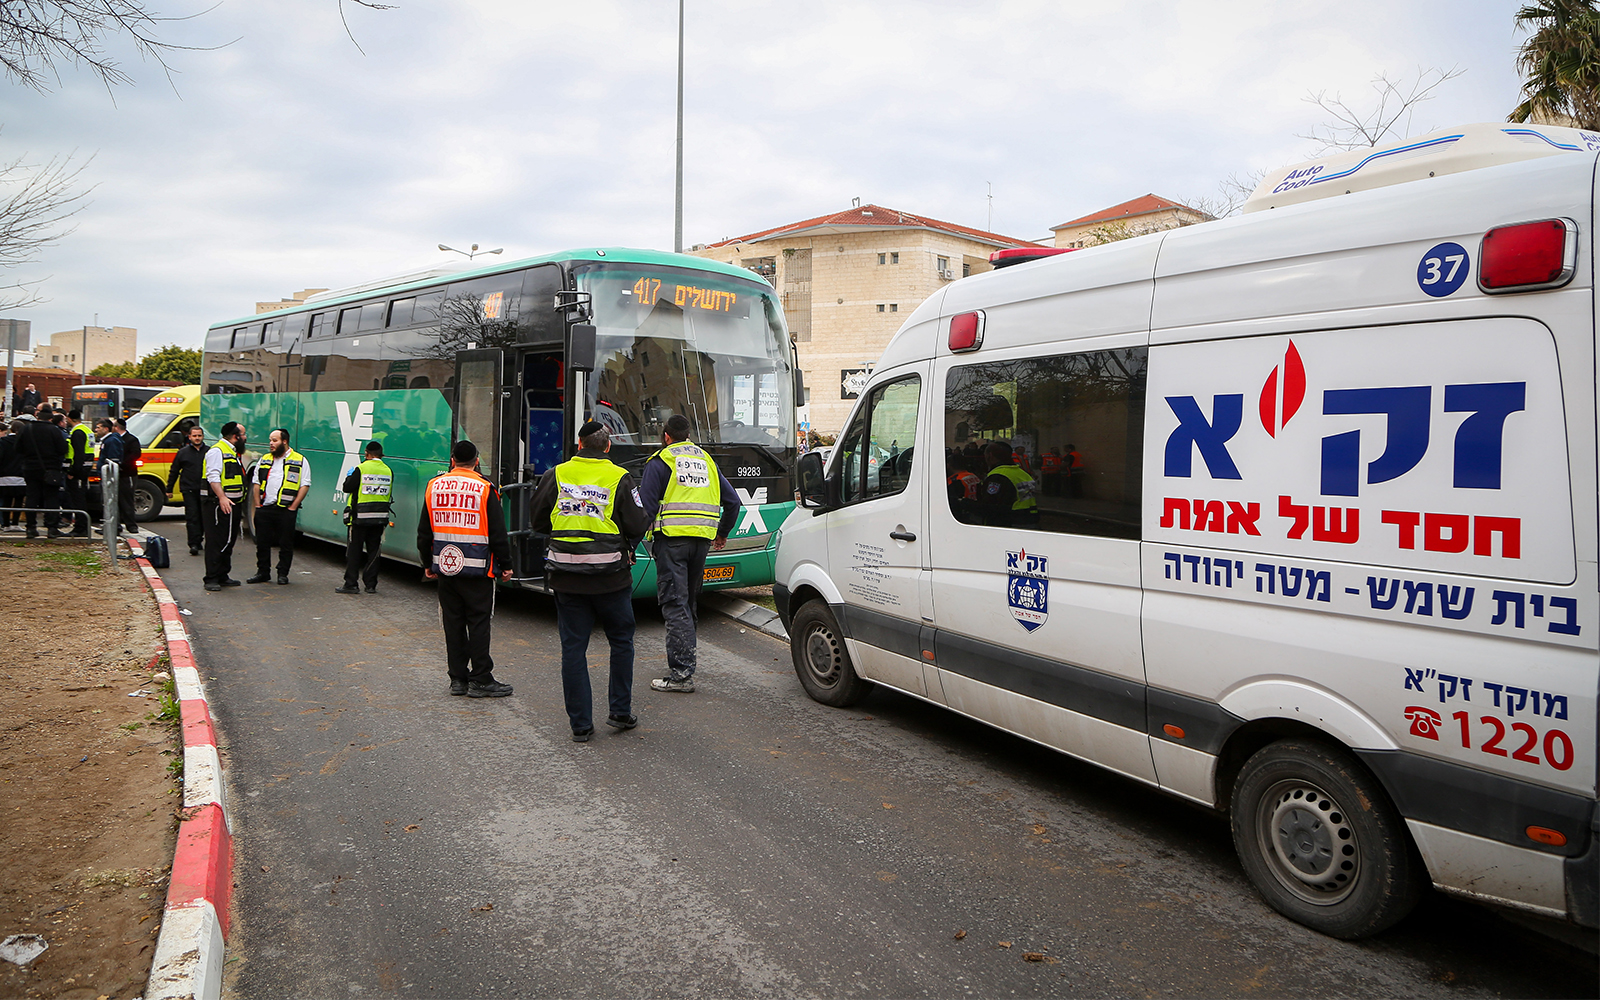 Illustrative: A ZAKA van and volunteers at the scene of an accident in Beit Shemesh, January 18, 2018. (Yaakov Lederman/Flash90)